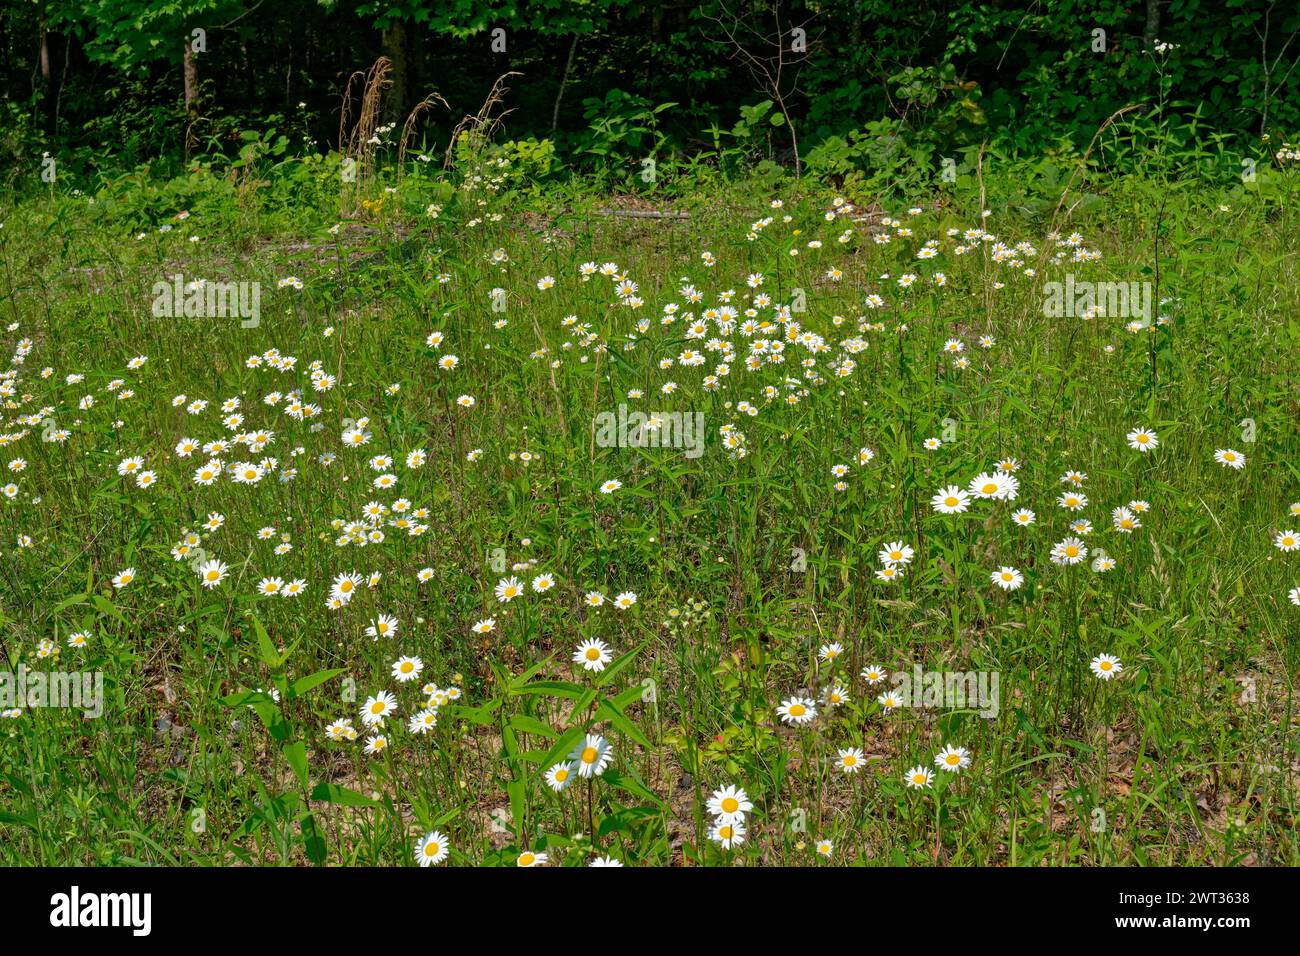 Field of tall blooming white with yellow center daisies growing and spreading between the other wild vegetation with a forest in the background on a s Stock Photo